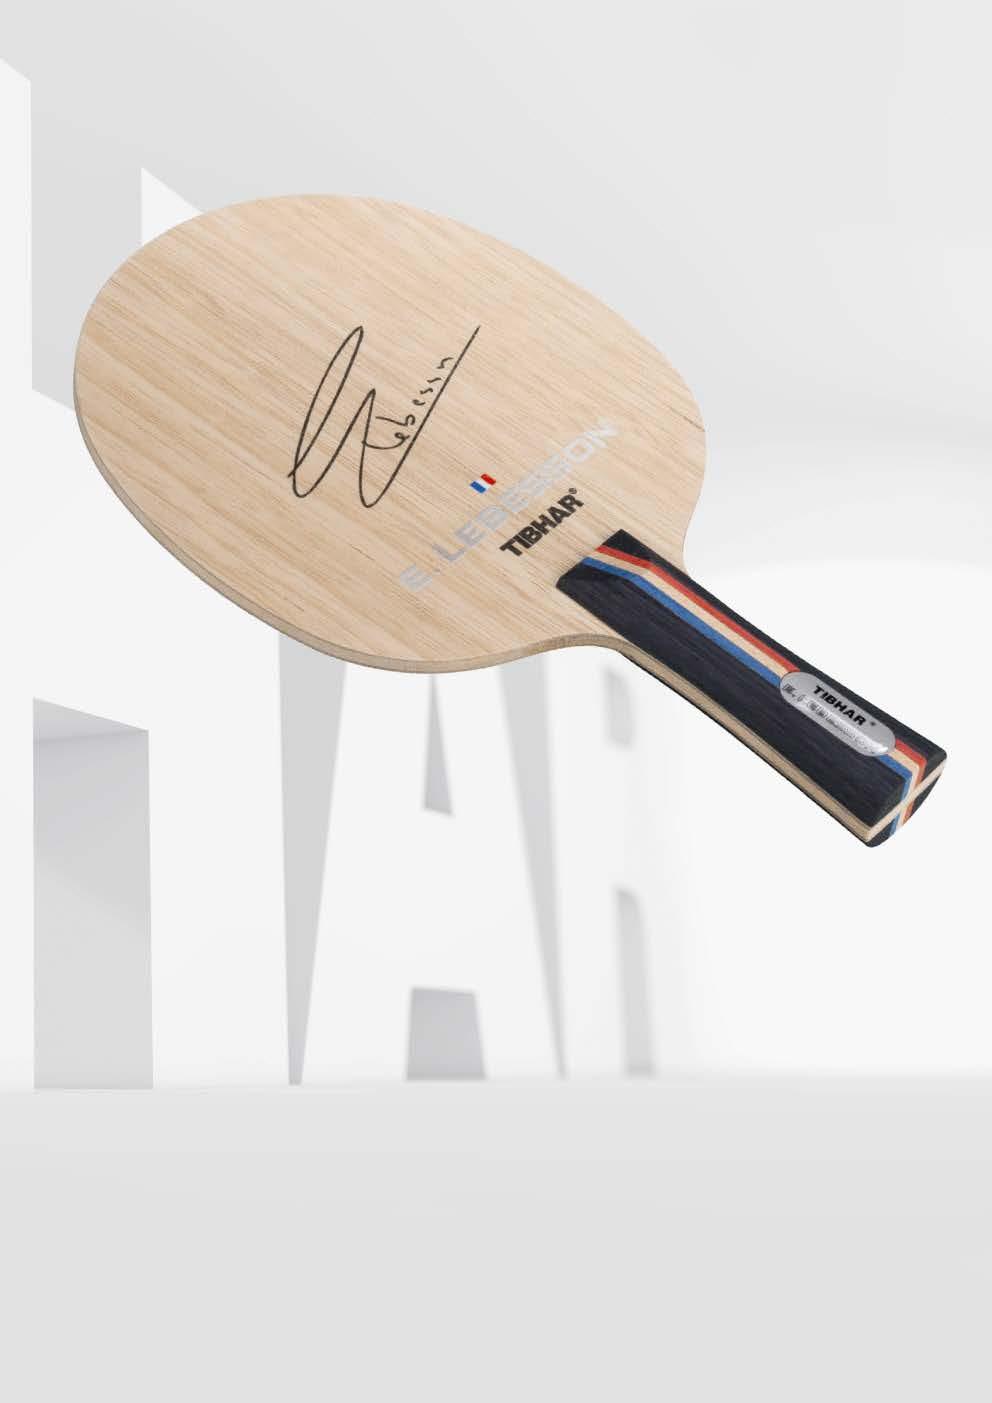 LEBESSON The blade of the French National Champion 2009, 2017 and European Champion 2016, Emmanuel Lebesson, stands for modern, athletic attaching table tennis of the French school always keeping the